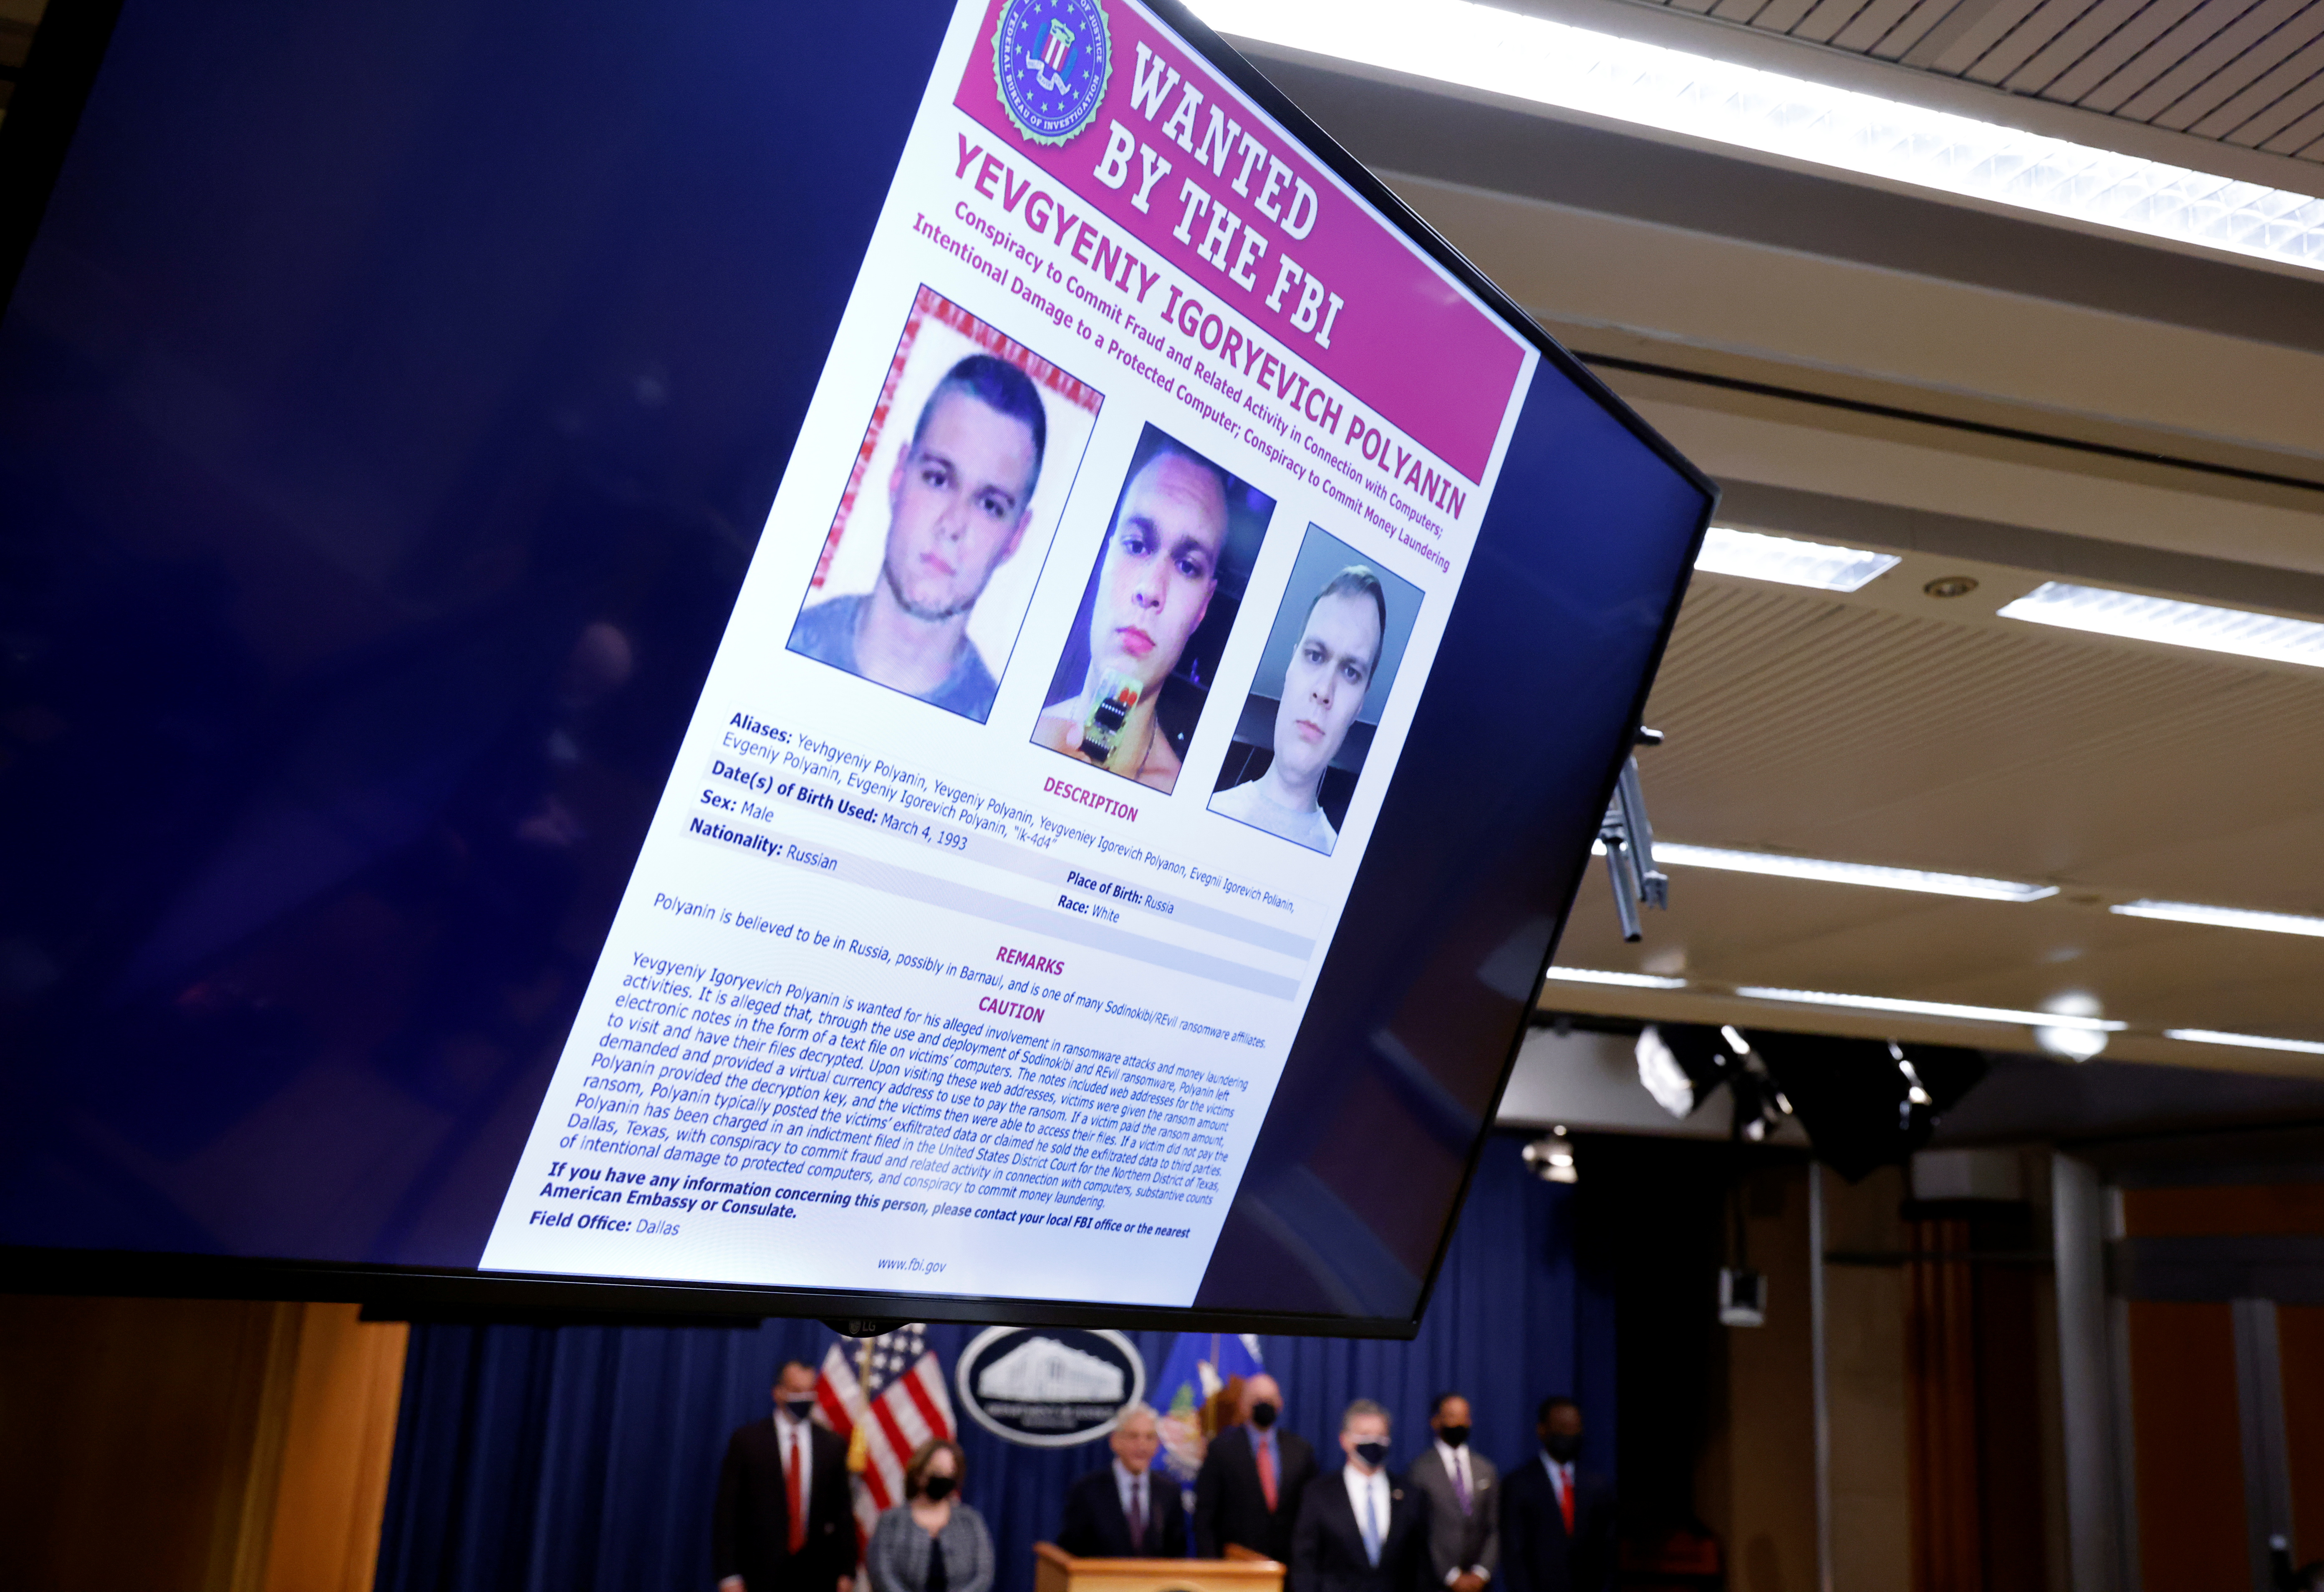 A 'wanted' poster showing Russian national Yevgeniy Polyanin is seen as U.S. Attorney General Merrick Garland announces charges over a July ransomware attack on an American company, as FBI Director Christopher Wray, Deputy Attorney General Lisa Monaco and Deputy Treasury Secretary Wally Adeyemo standby during a news conference at the Justice Department in Washington, U.S., November 8, 2021. REUTERS/Jonathan Ernst